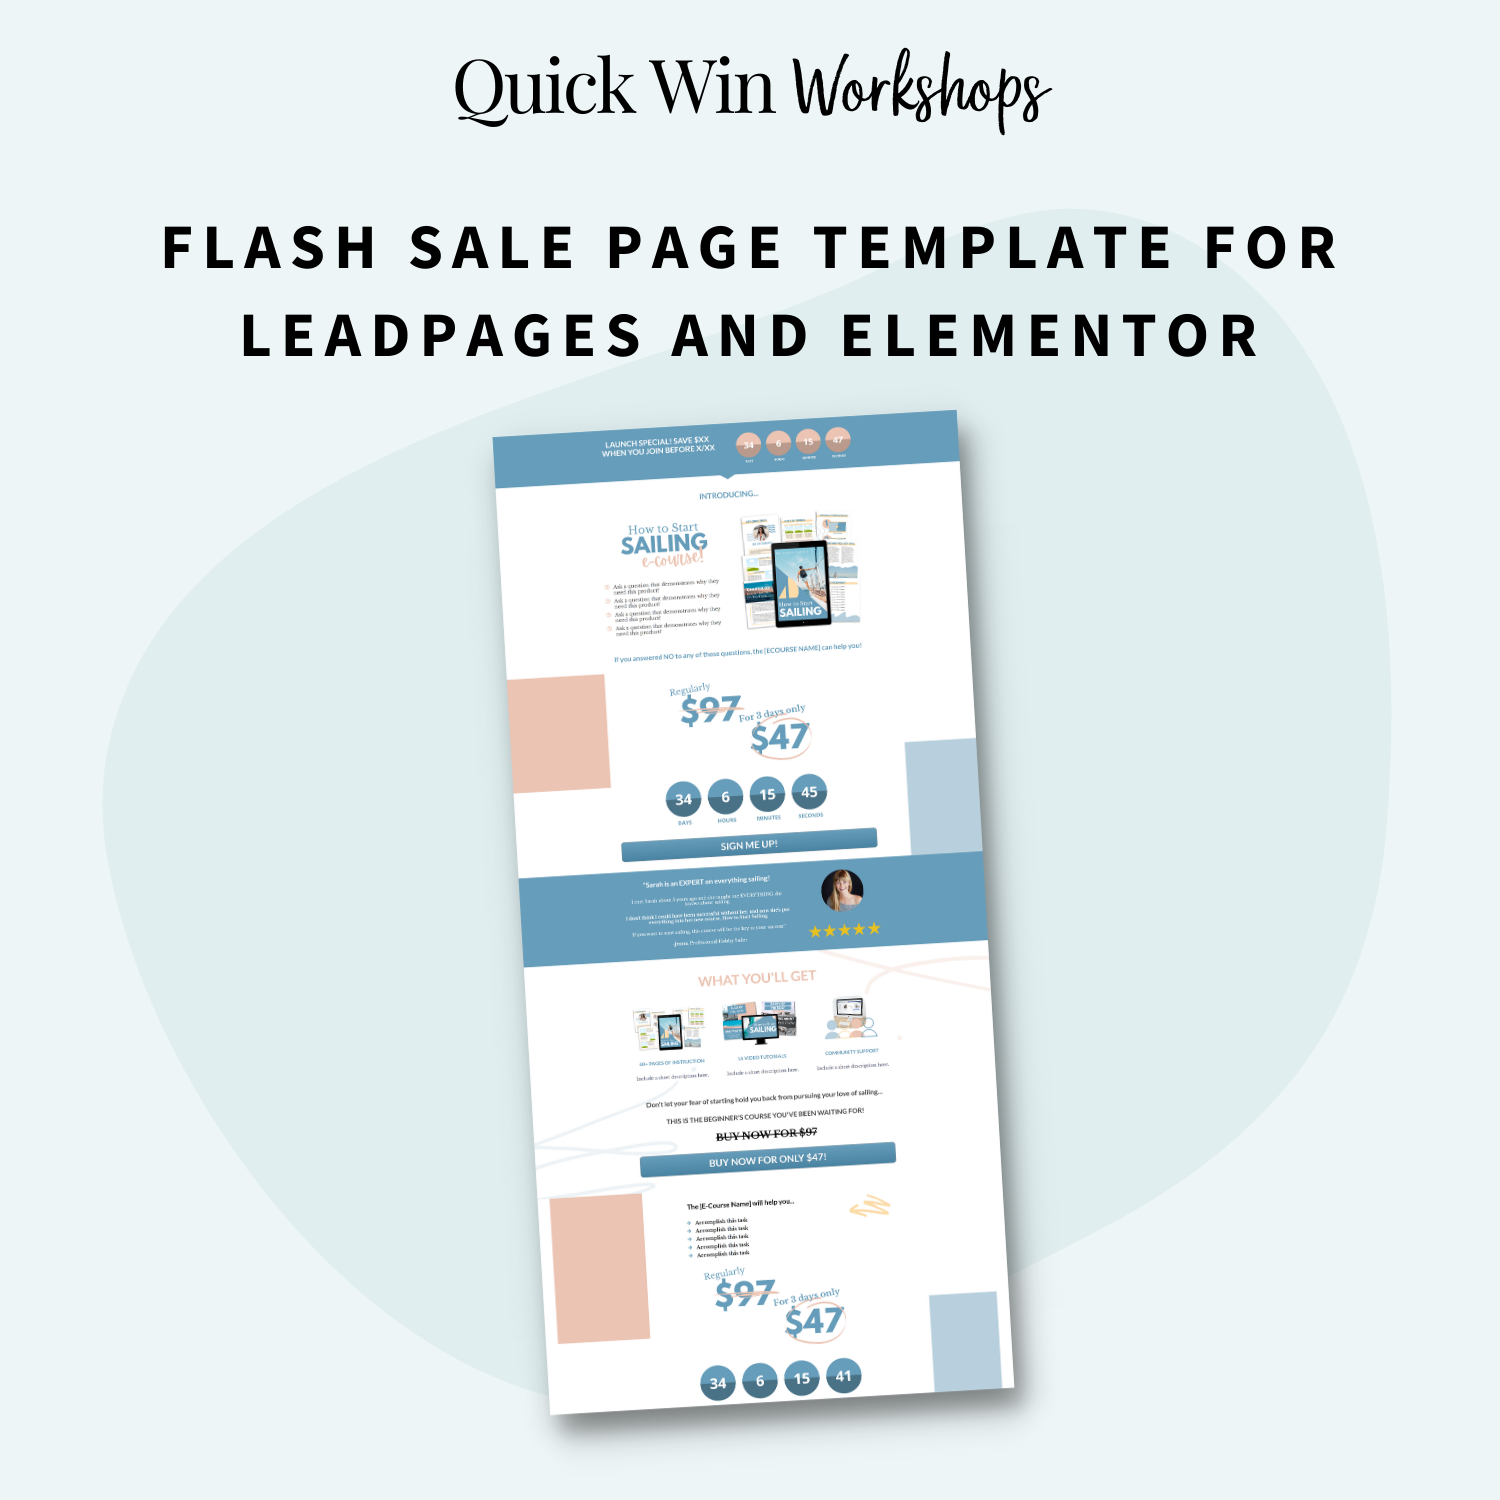 Quick Win Workshop: Make Selling Easy with Flash Sales comes with a flash sale page template for Leadpages and Elementor